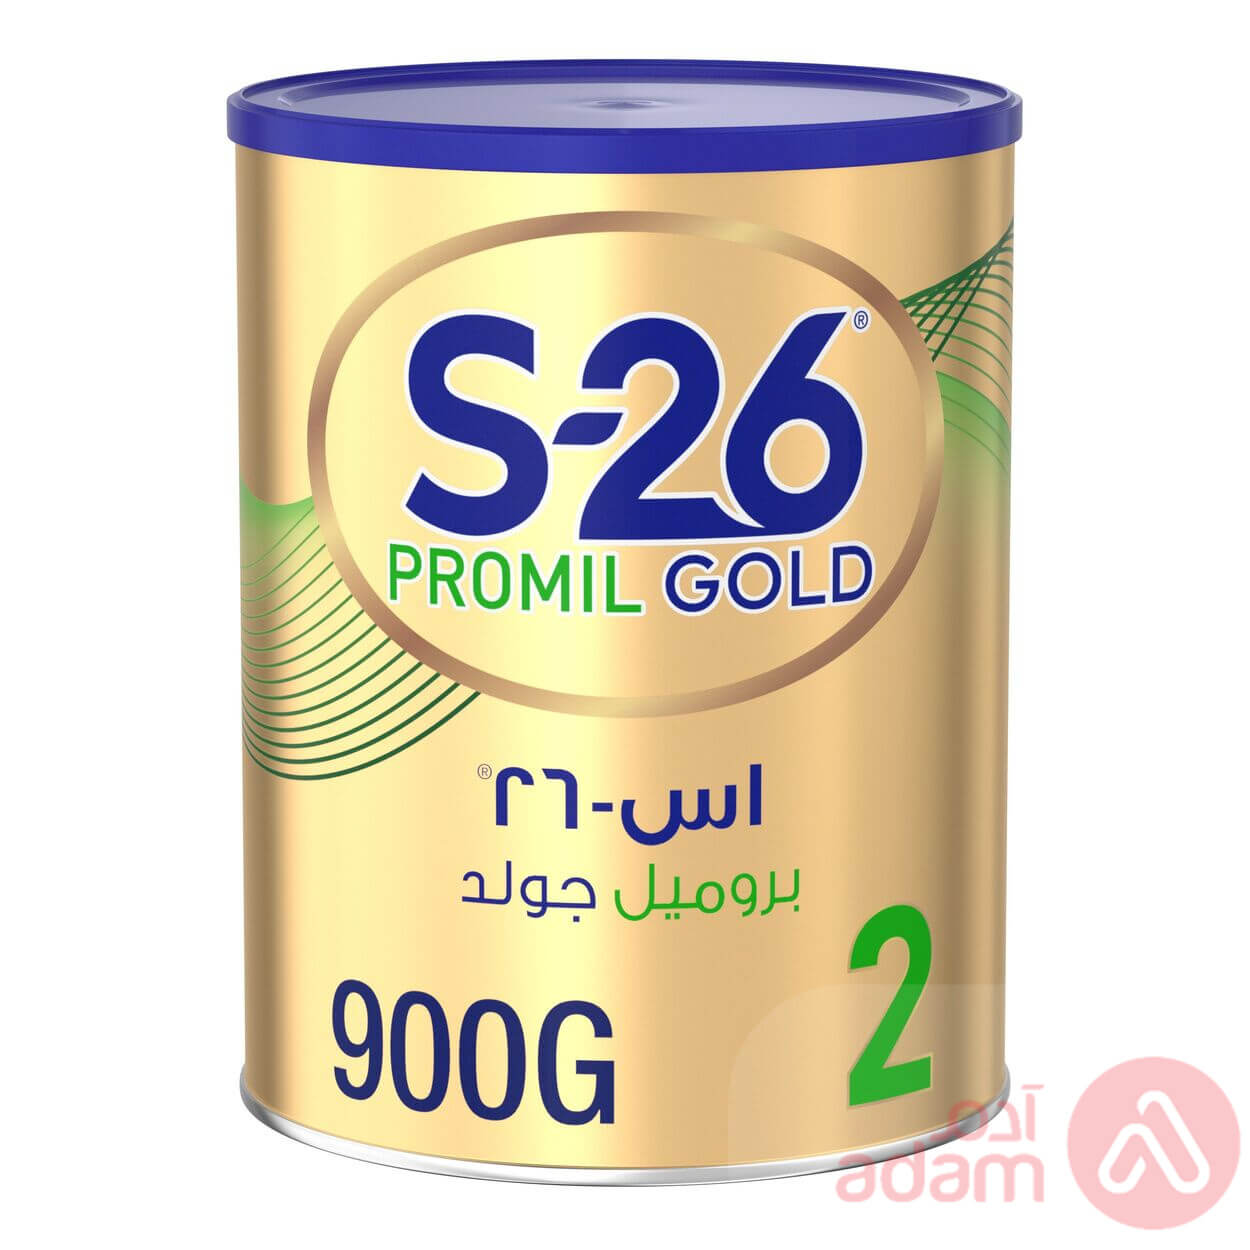 S-26 Promil Gold No 2 | 900G